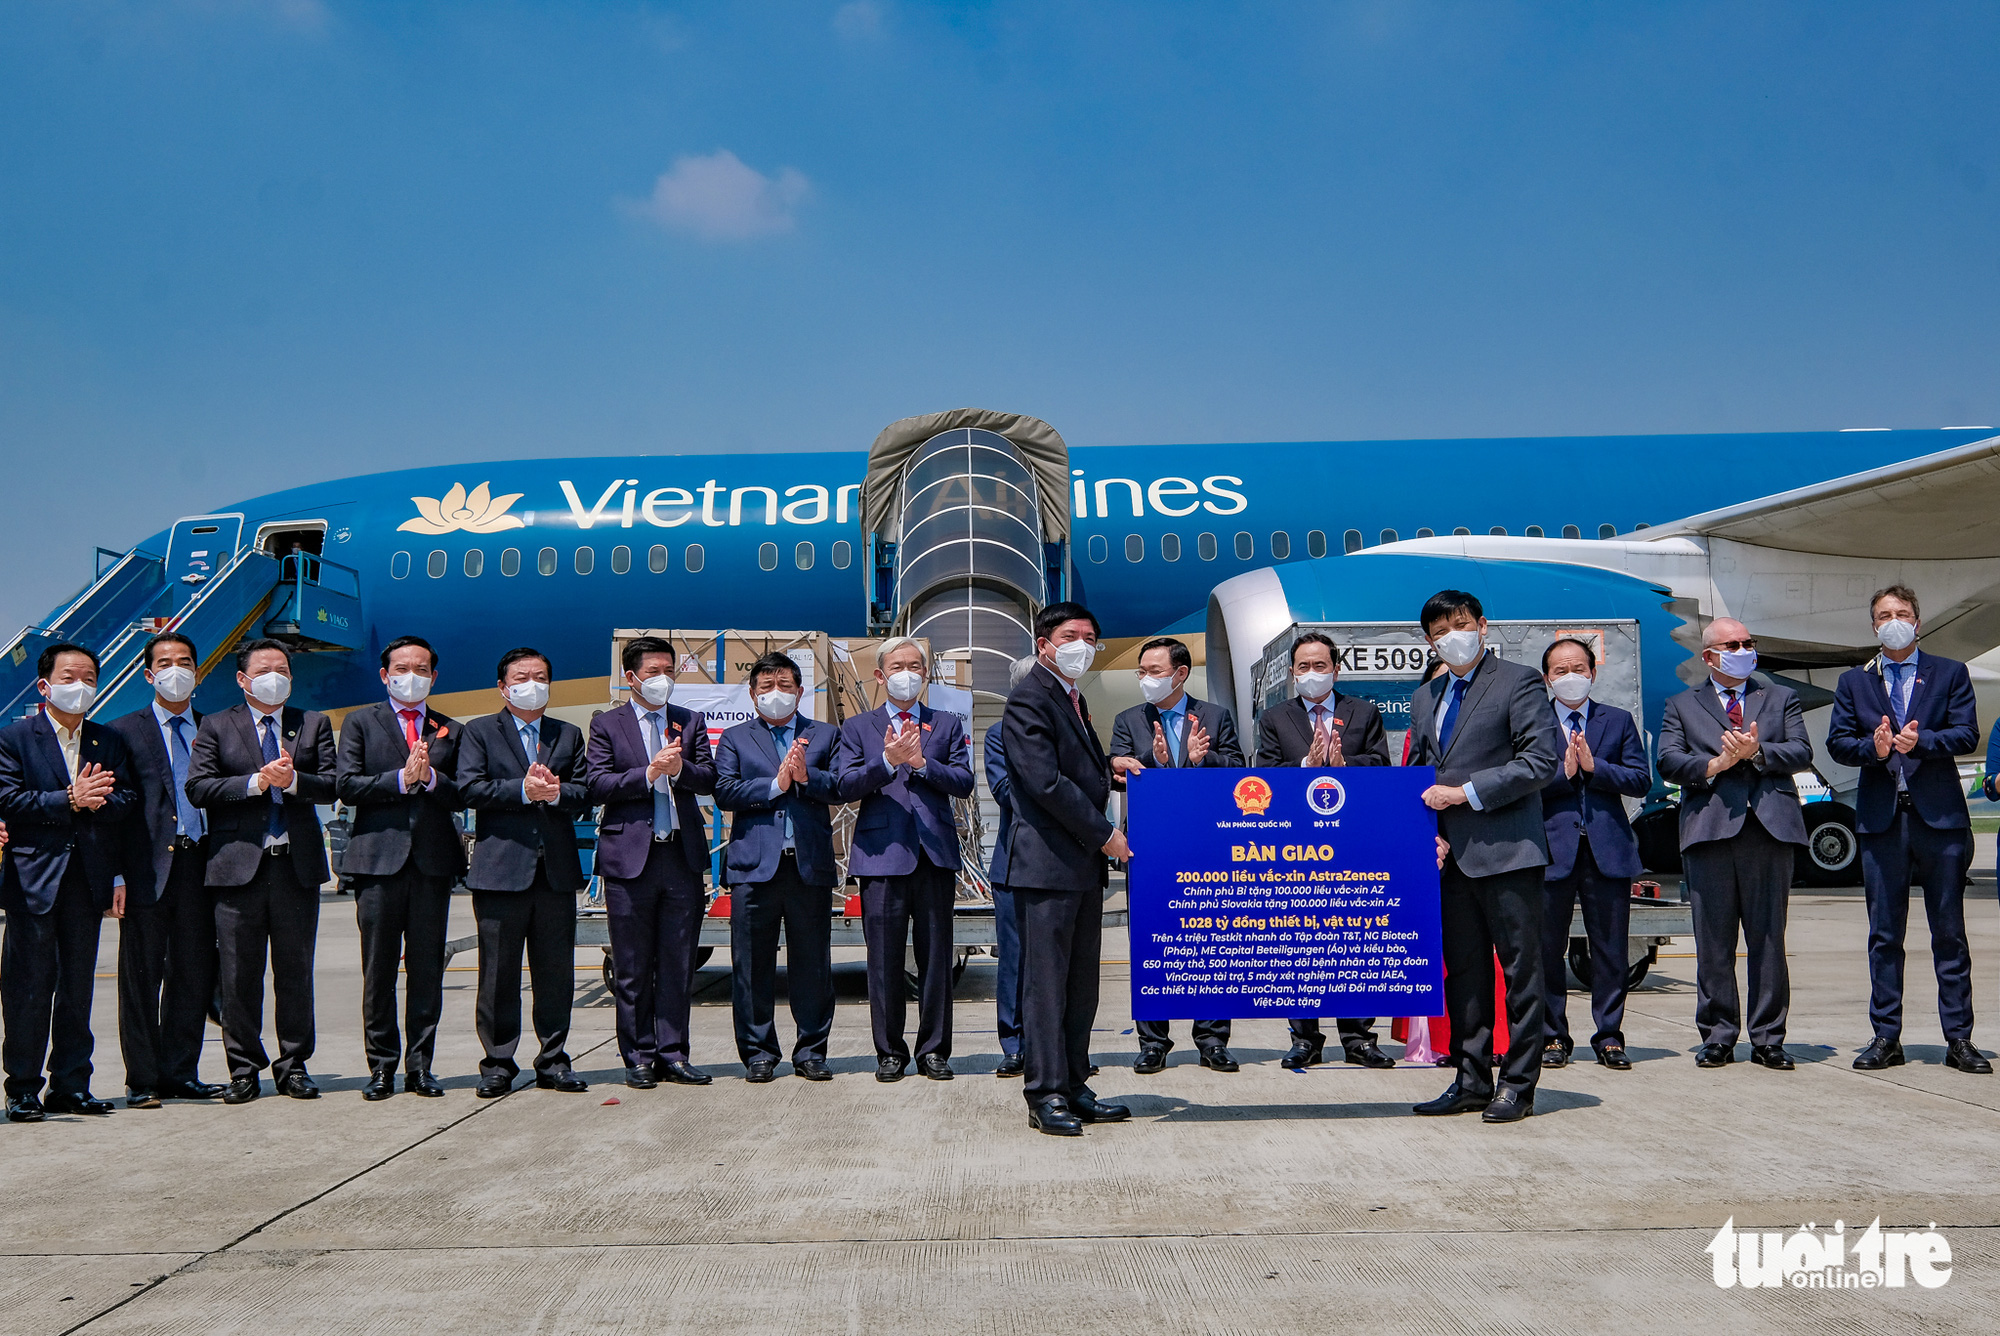 Vietnam legislature hands over 200,000 donated COVID-19 jabs following chairman’s trip to Europe